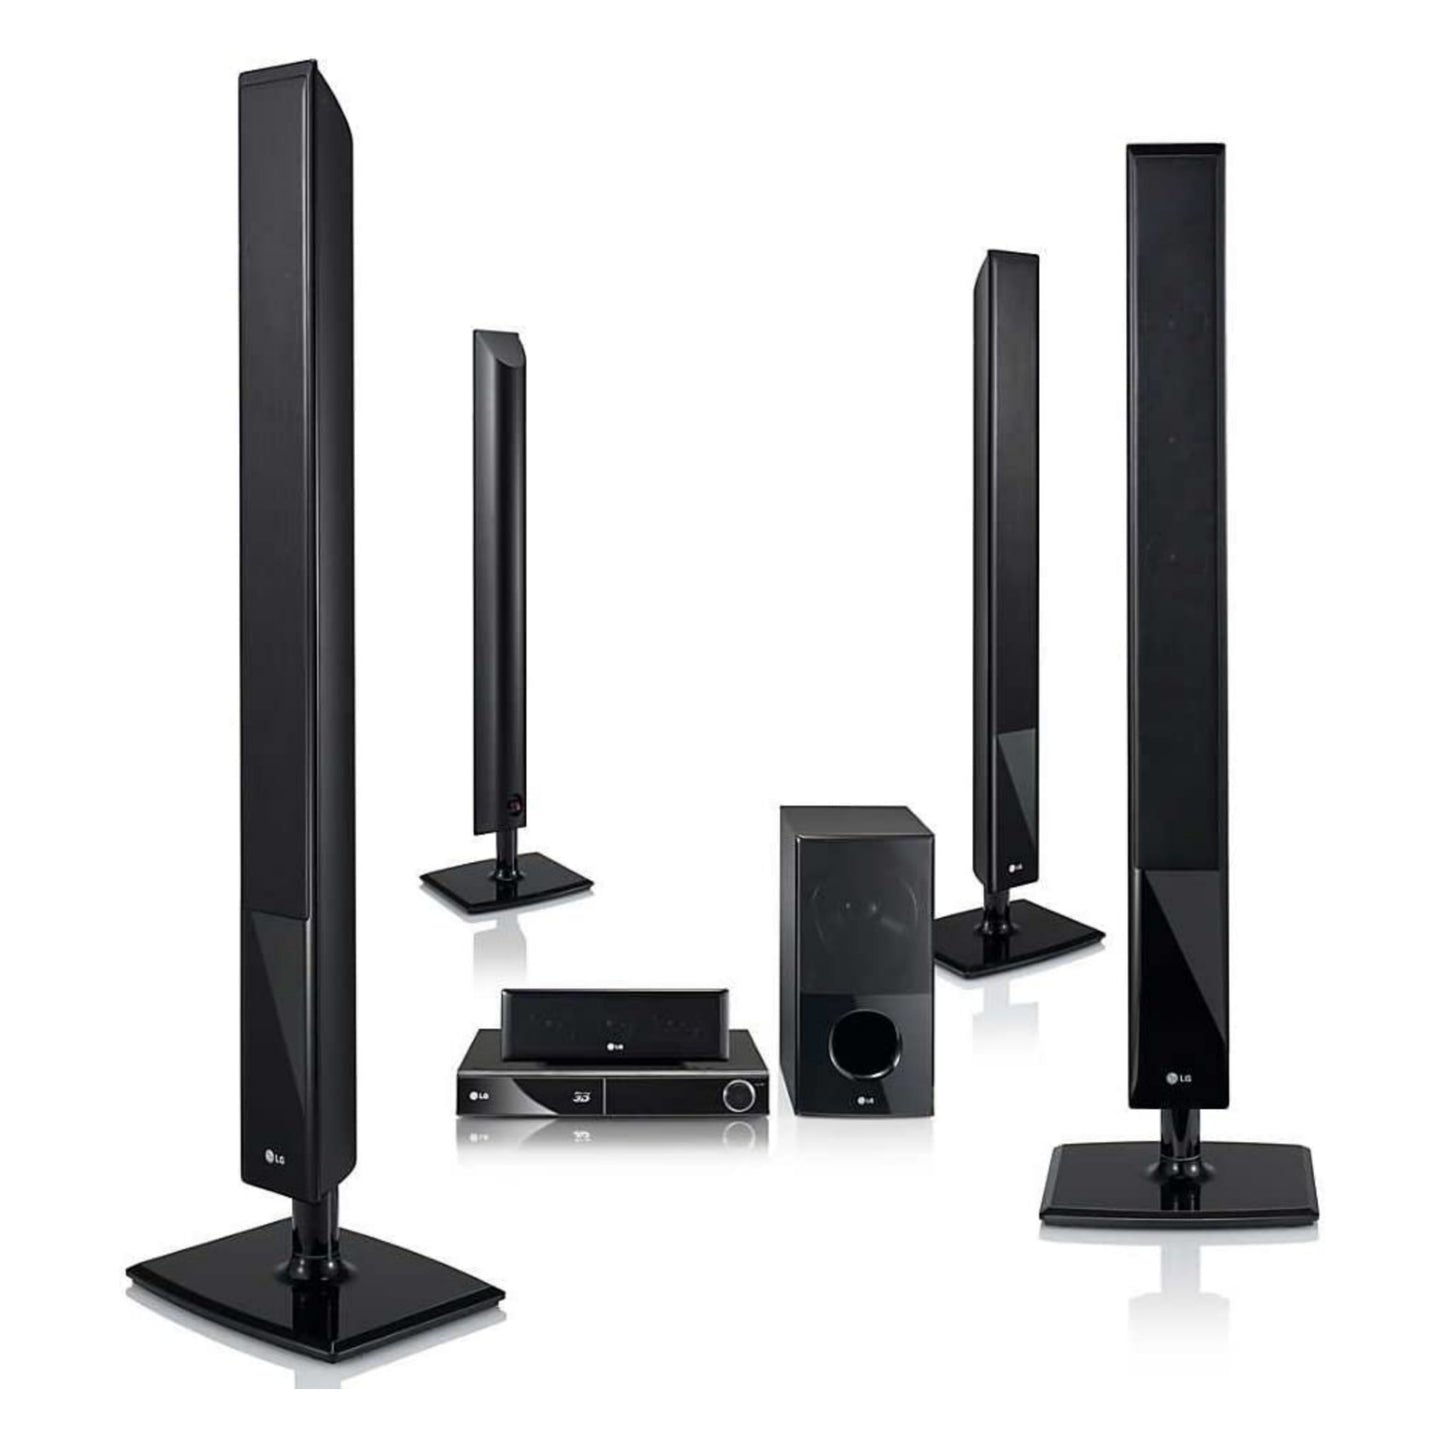 LG HX806TG 5.1Ch 850W Blu-ray DVD Home Theater System (USB, FM, Aux, Optical, HDMI Out) - Foreign Used